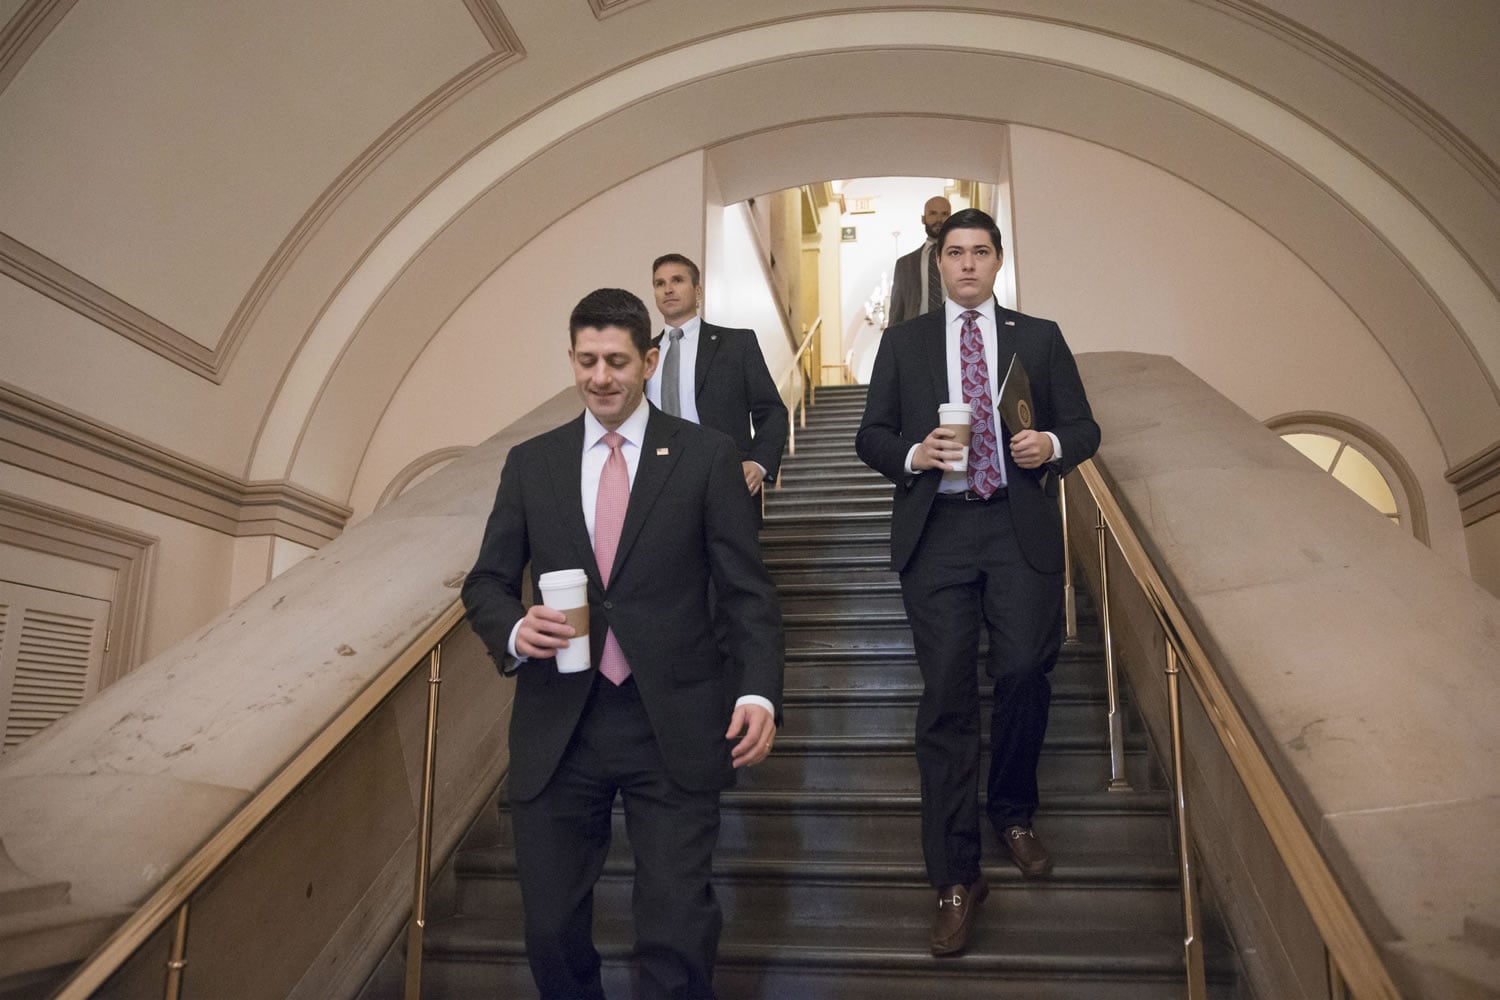 House Speaker Paul Ryan of Wis. descends steps at the Capitol in Washington on March 1 on the way to a Republican caucus meeting. (AP Photo/J.